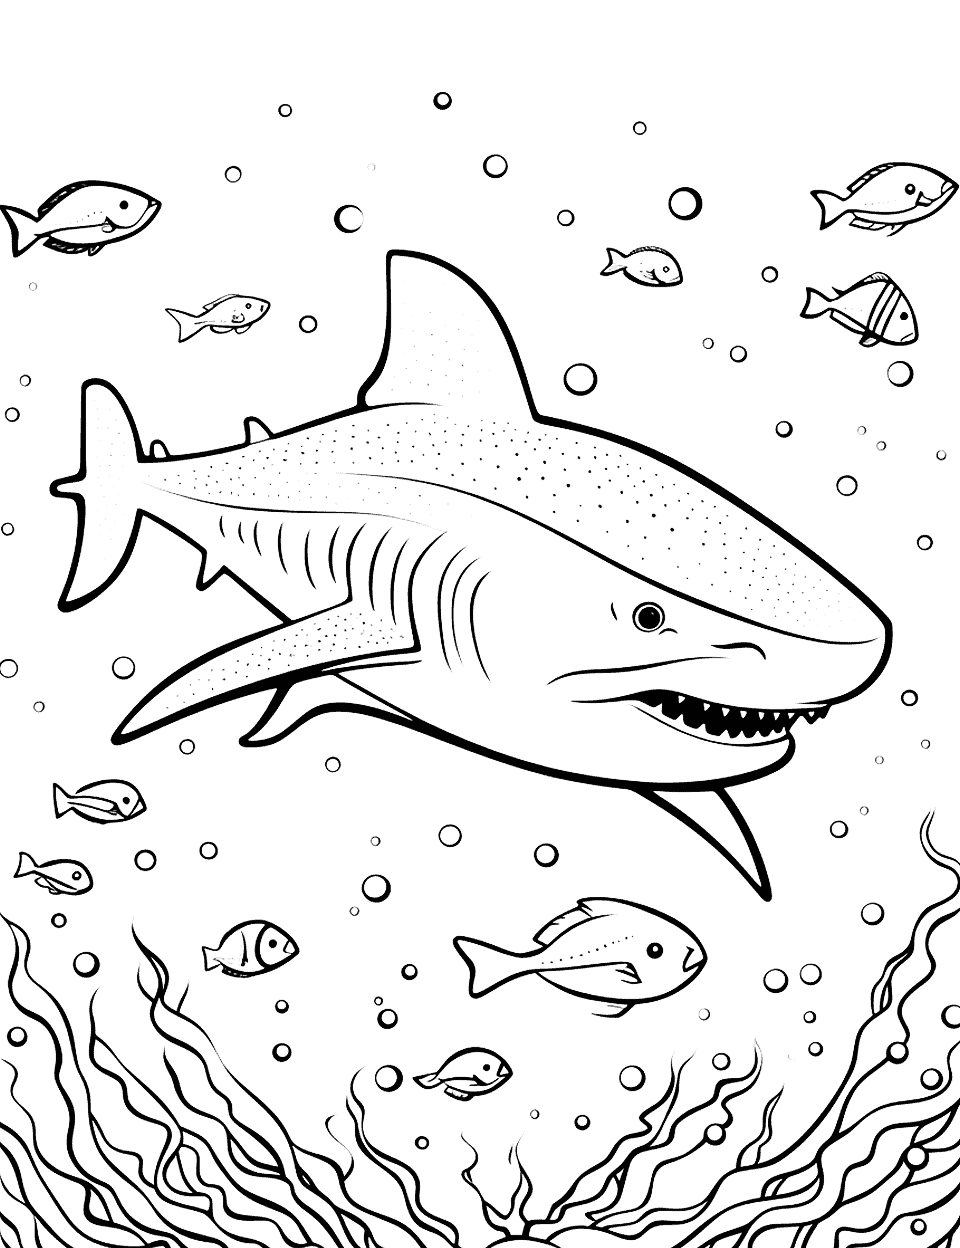 Hungry Shark and Fish Feast Coloring Page - A hungry shark surrounded by a school of fish.